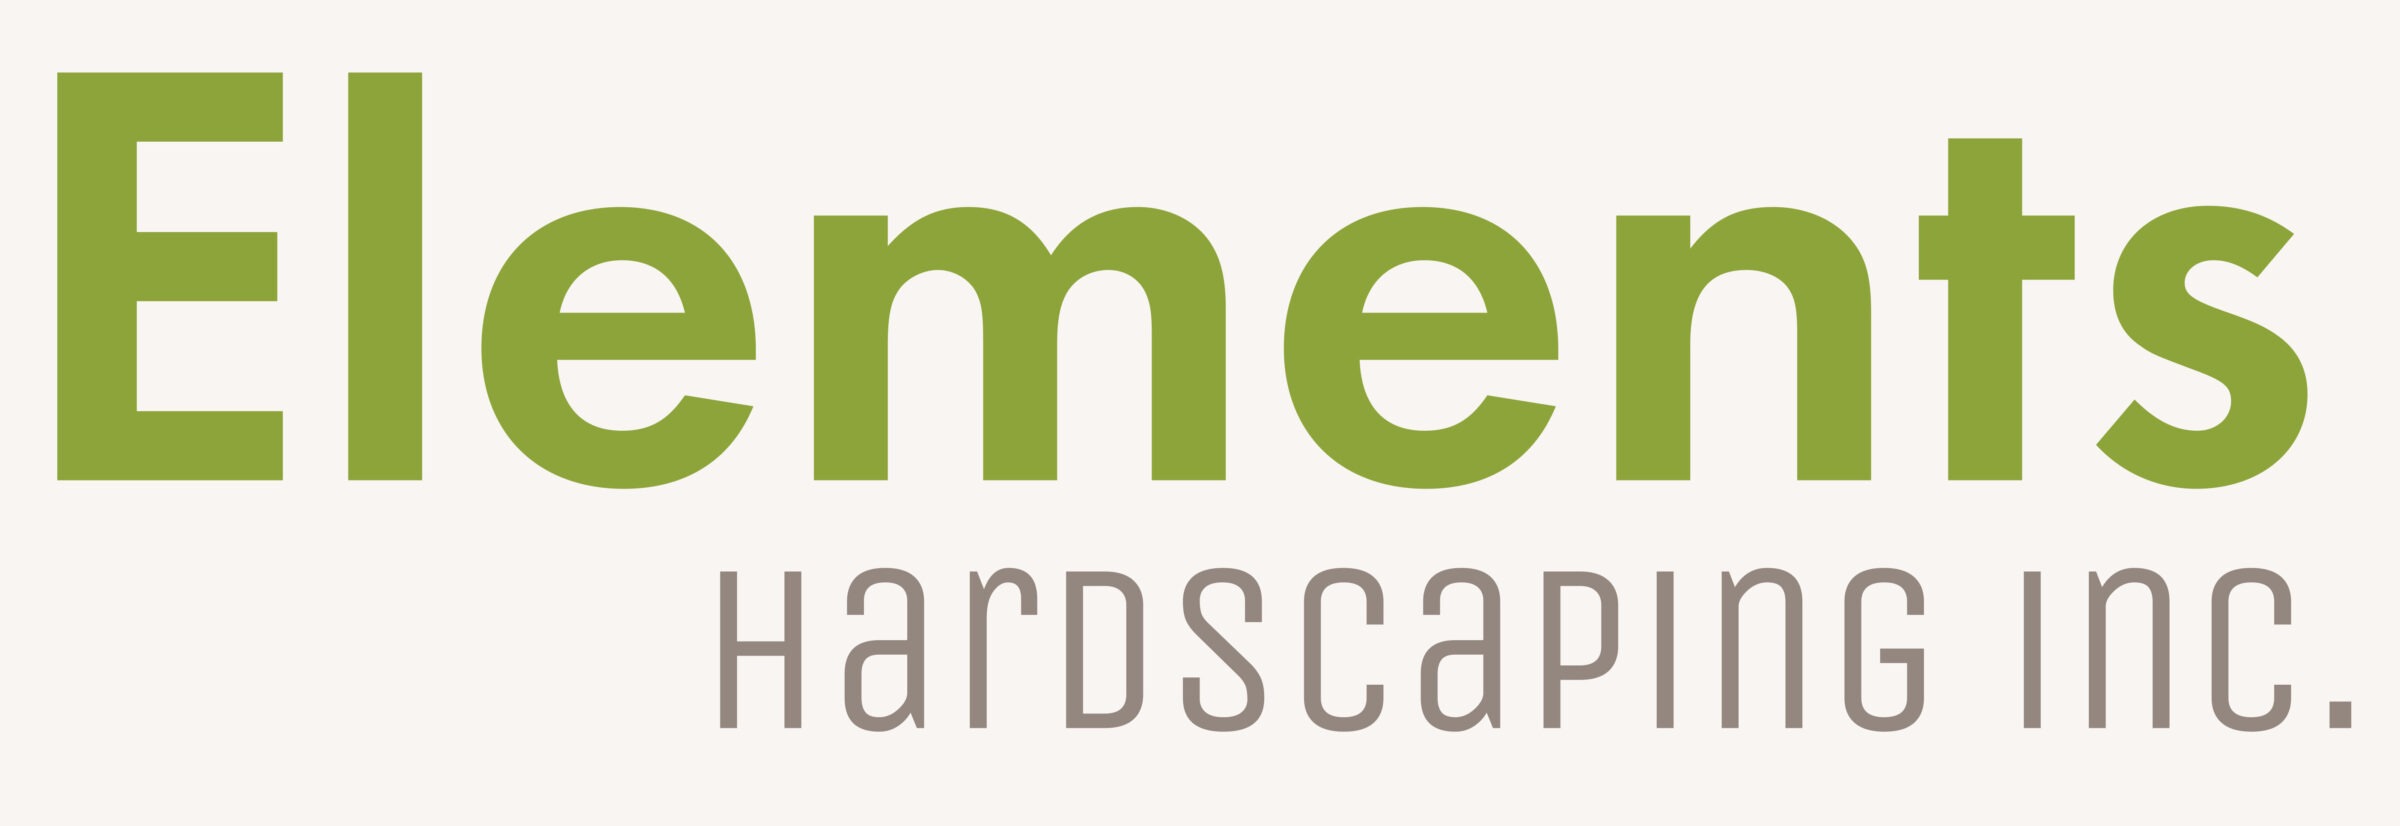 The image features a company logo with the text "Elements Hardscaping inc." in green and gray sans-serif fonts on a white background.